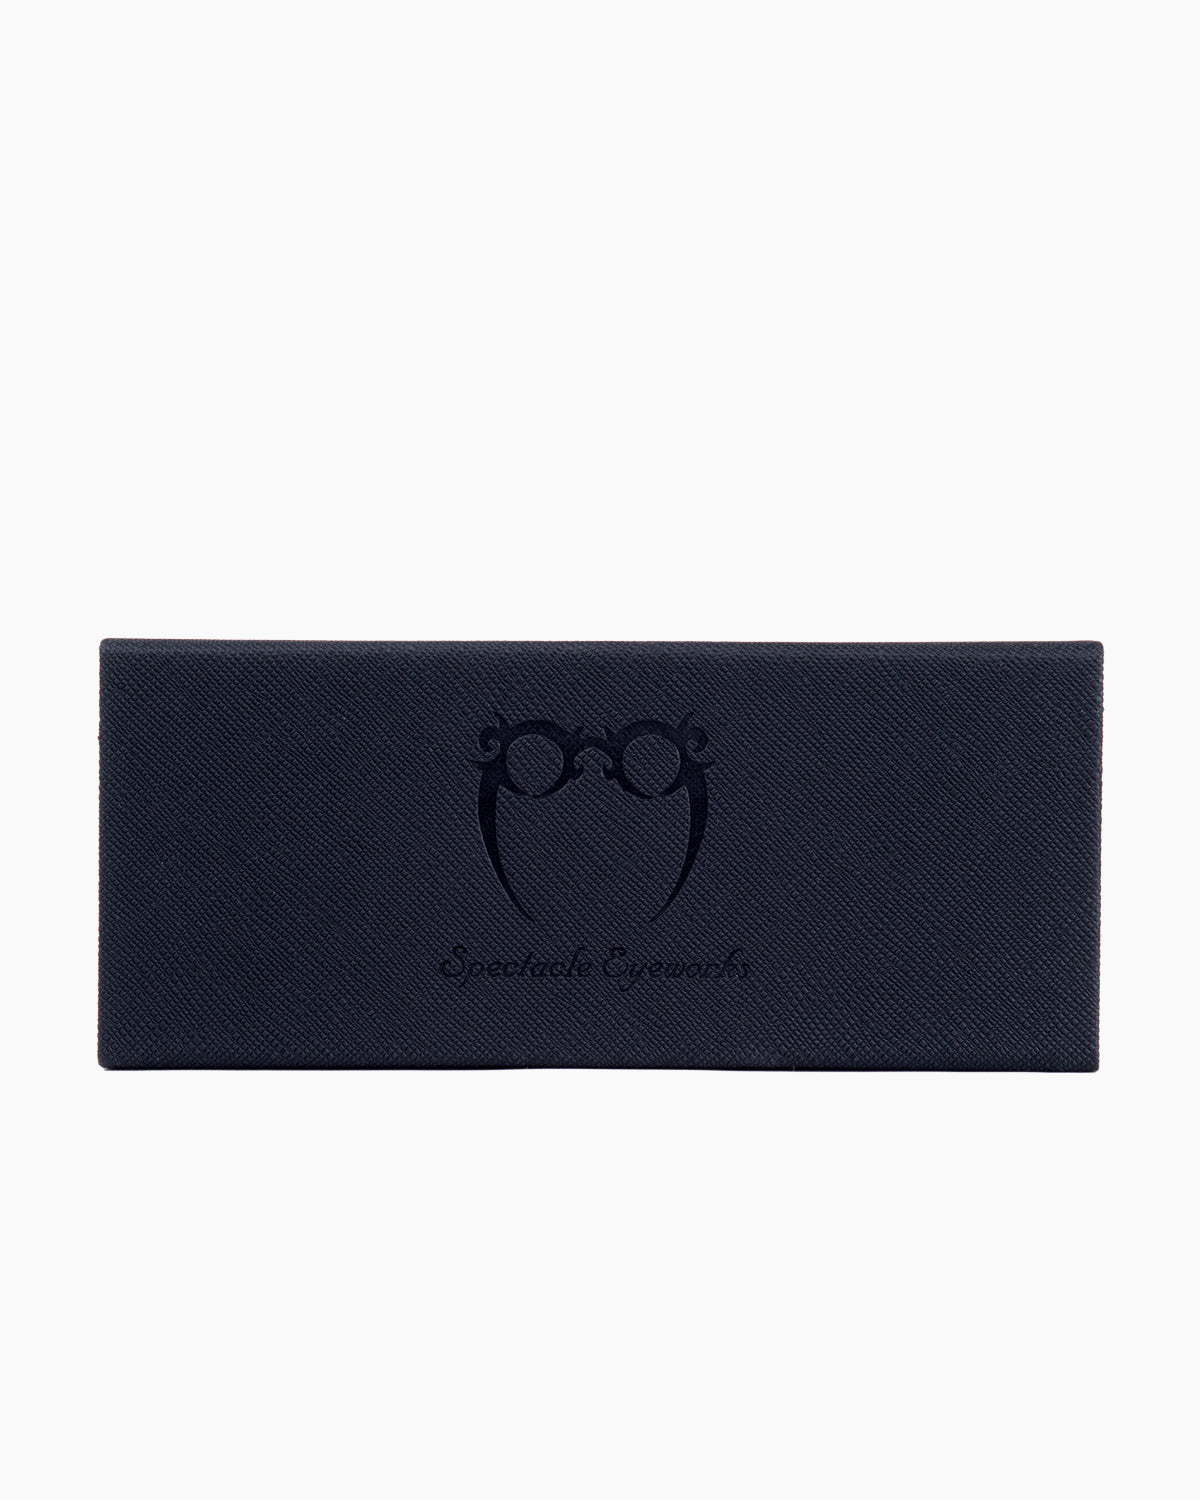 Spectacleeyeworks - Wendy - 730 | Bar à lunettes